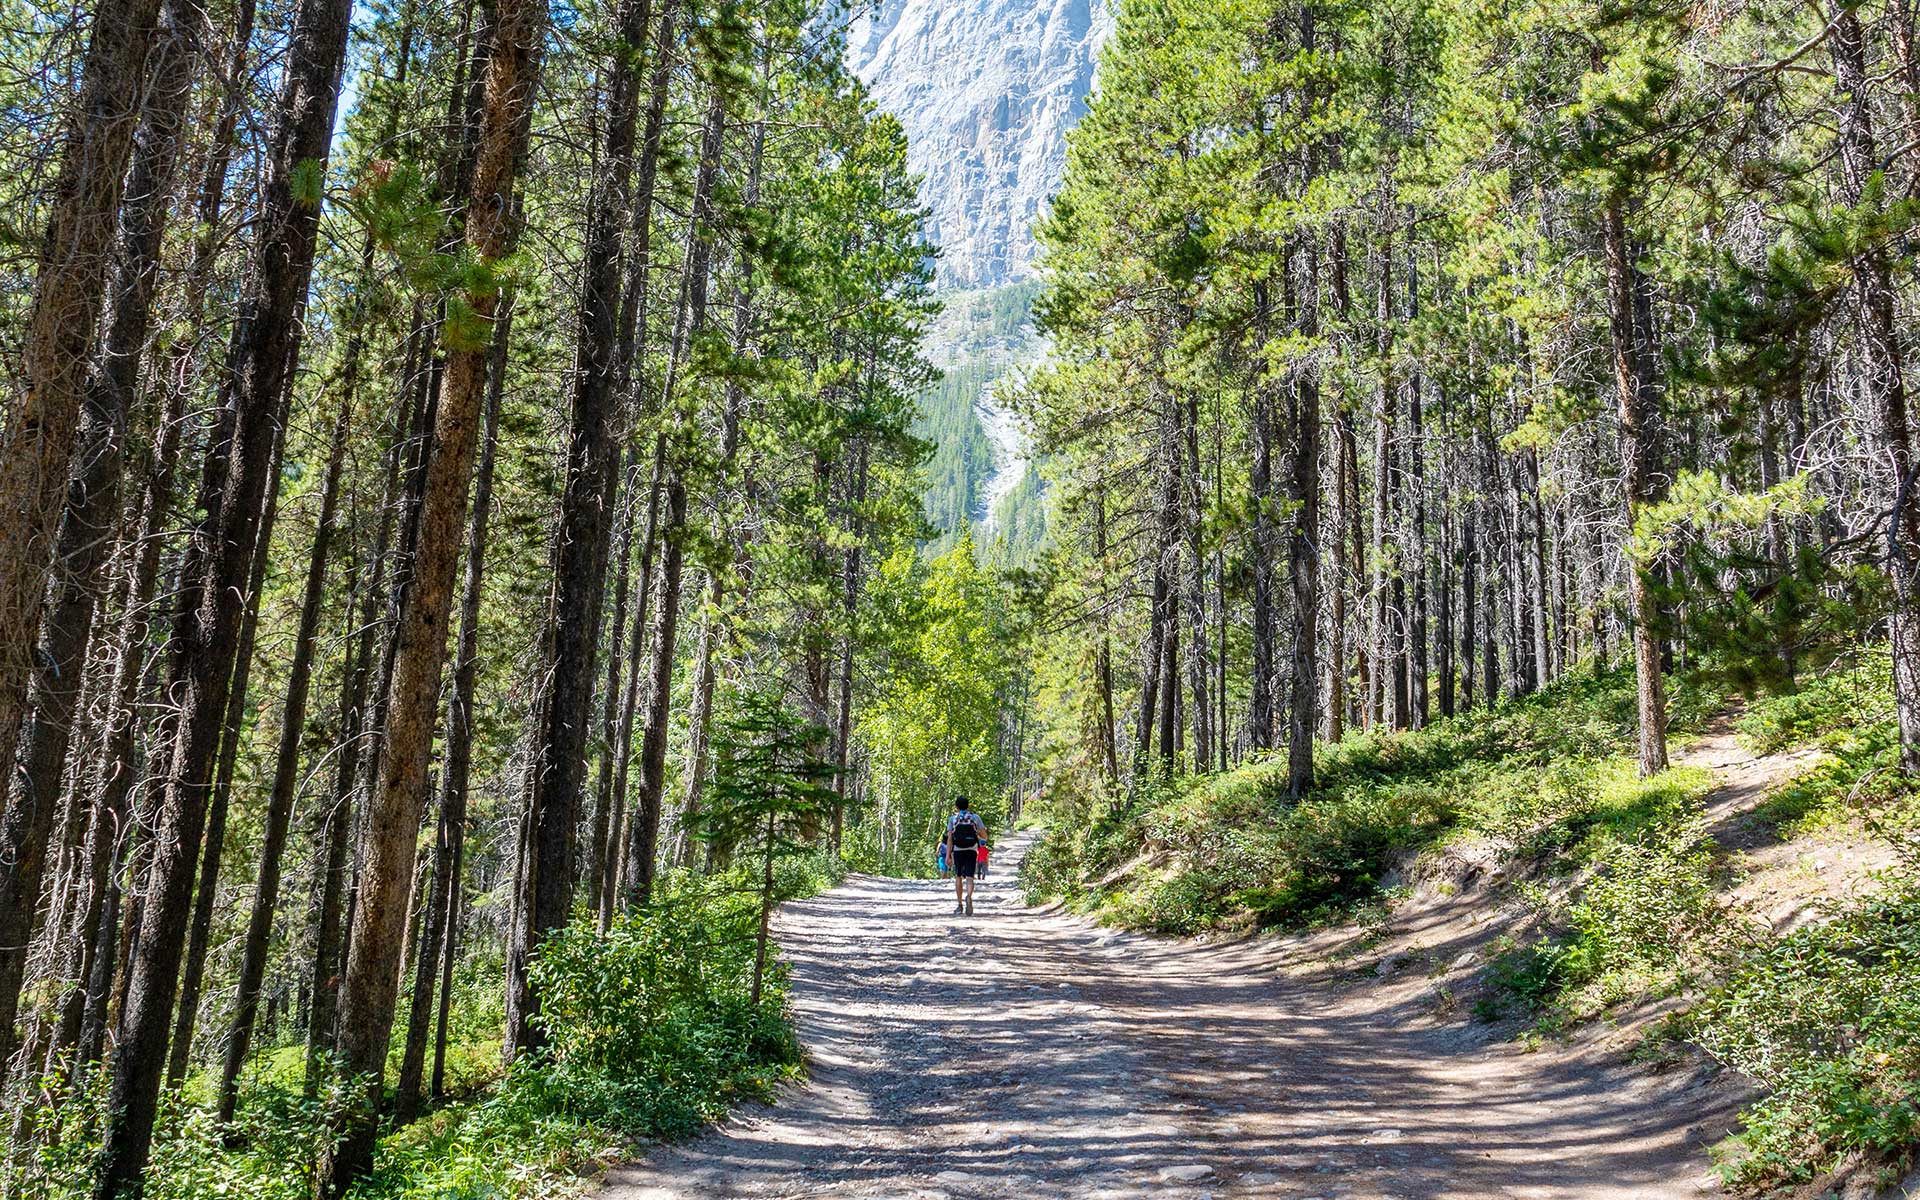 A person is walking up the gravel trail through pine trees on the Grassi Lakes hike.